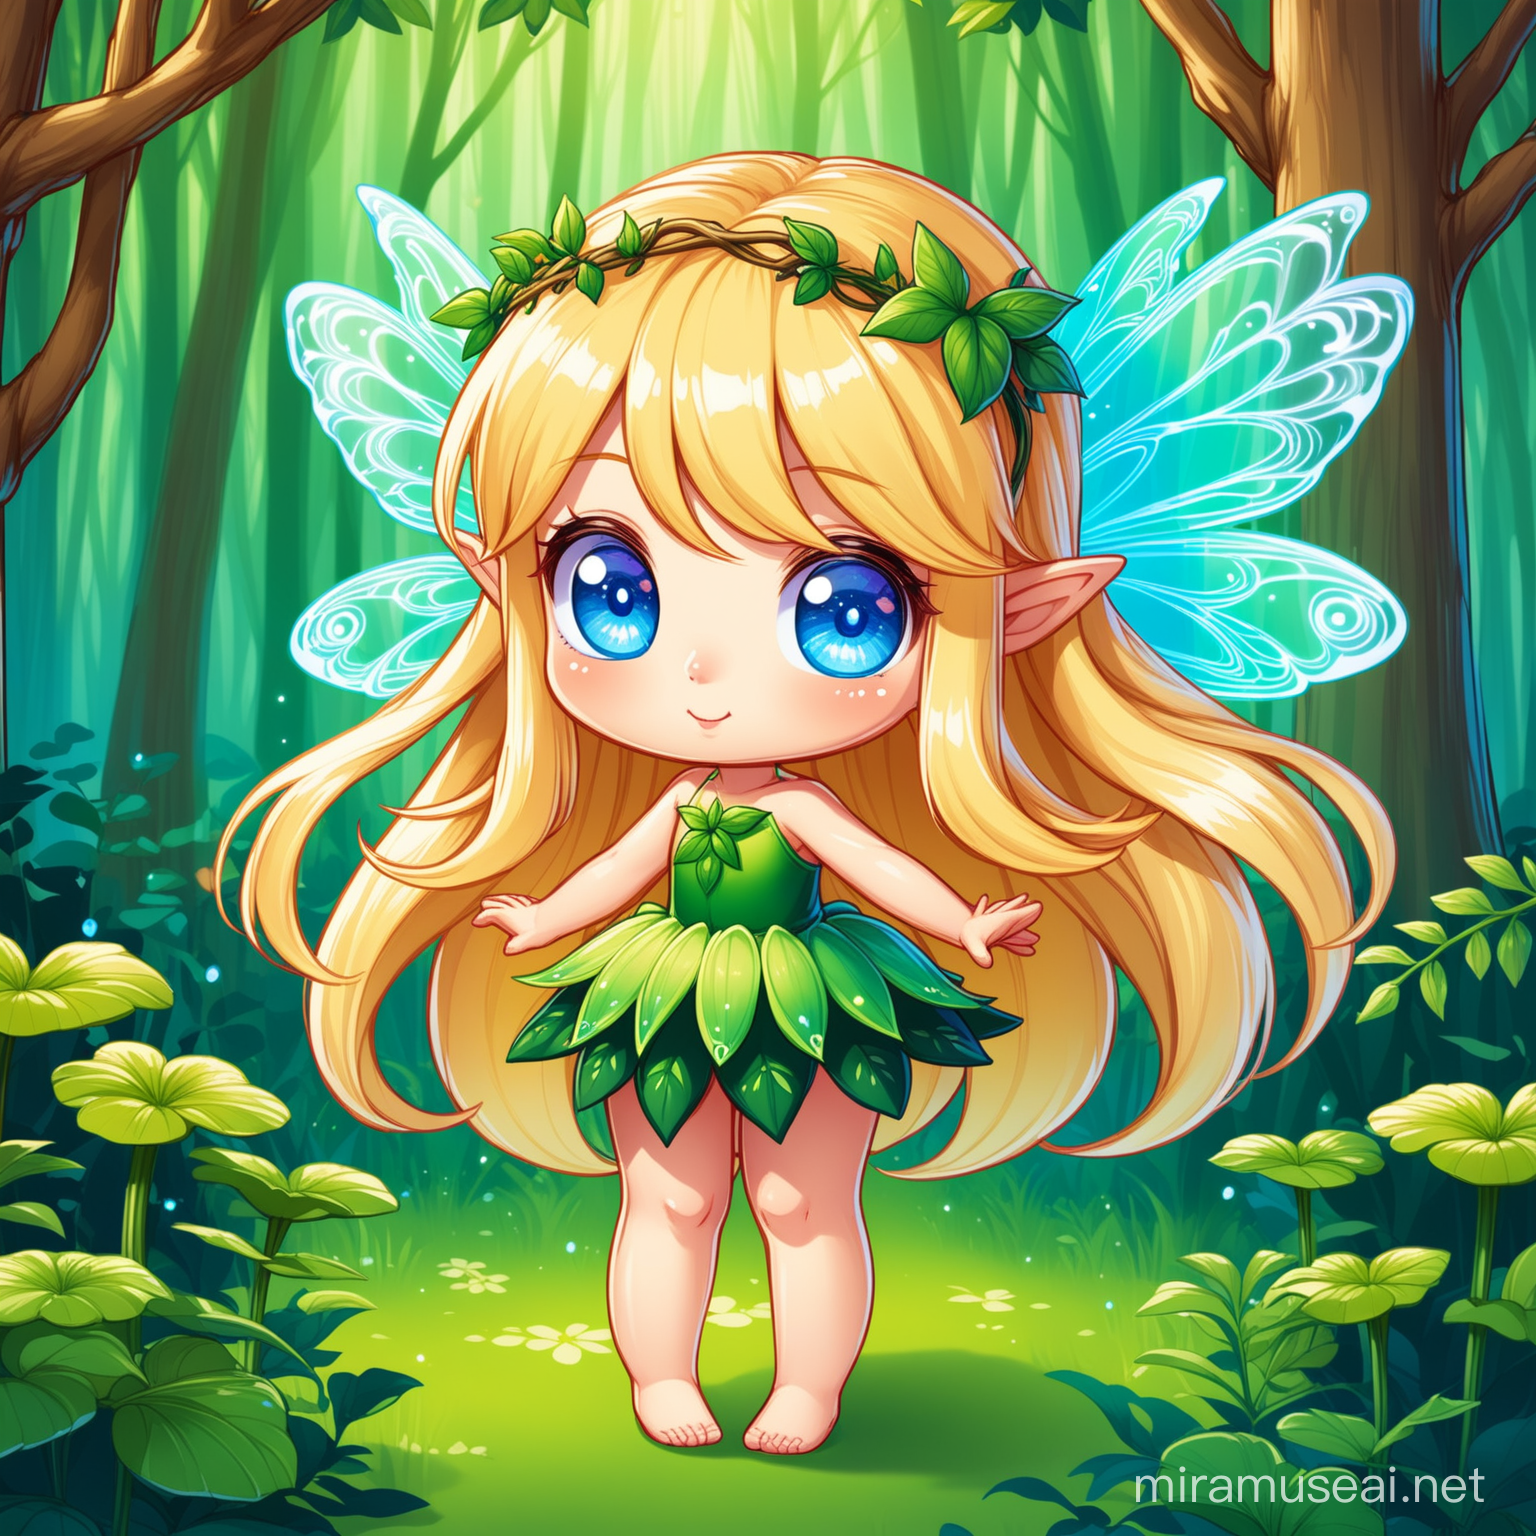 Enchanting Forest Fairy with Long Blonde Hair and Big Blue Eyes